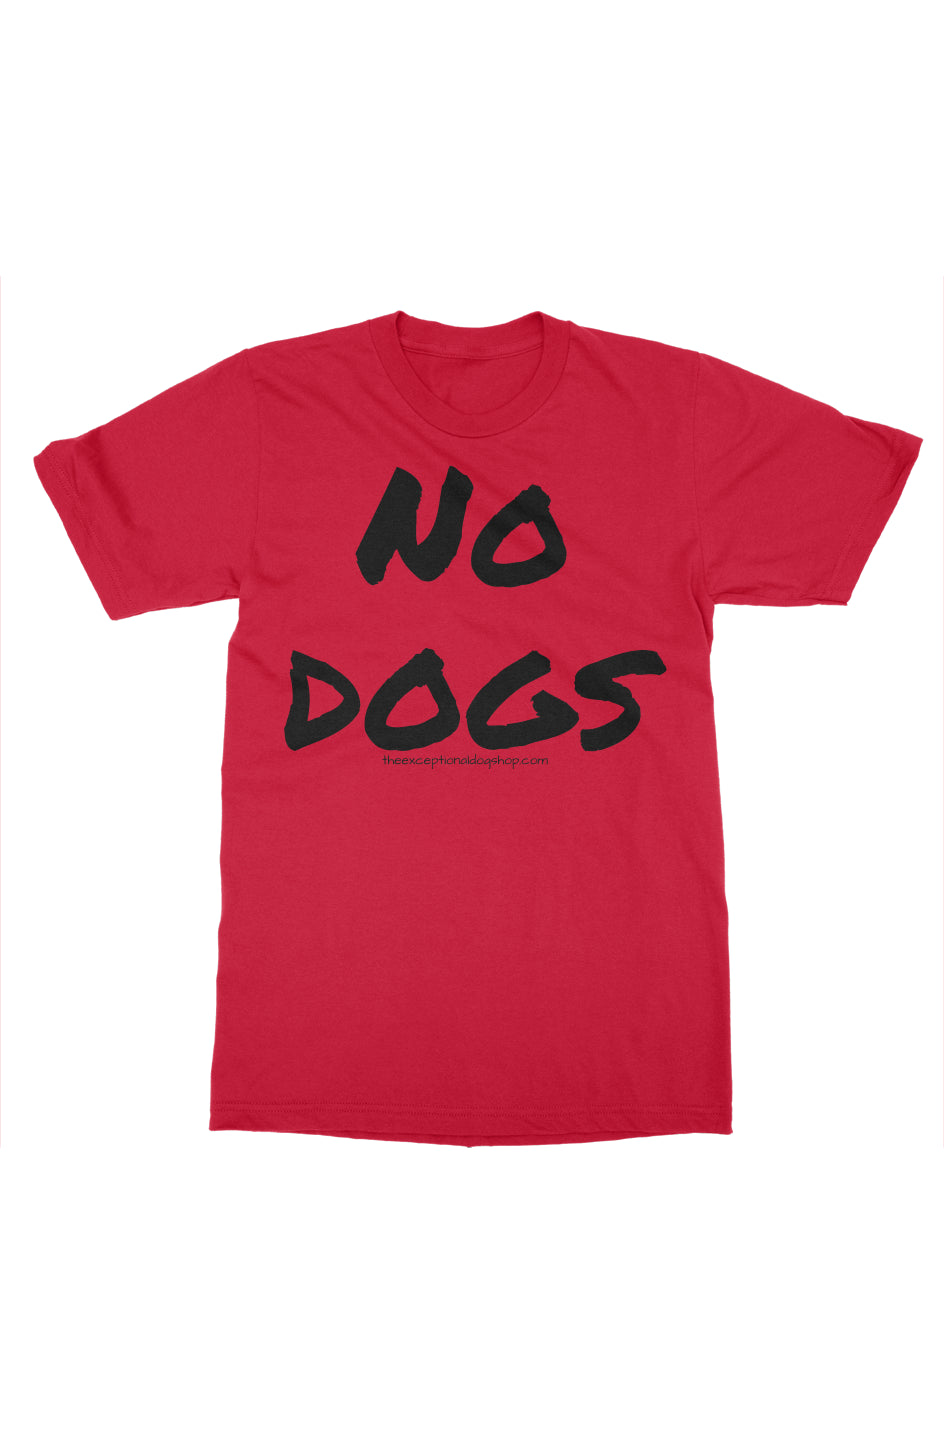 Red training t shirt with the text no dogs in large lettering on the front of the shirt.